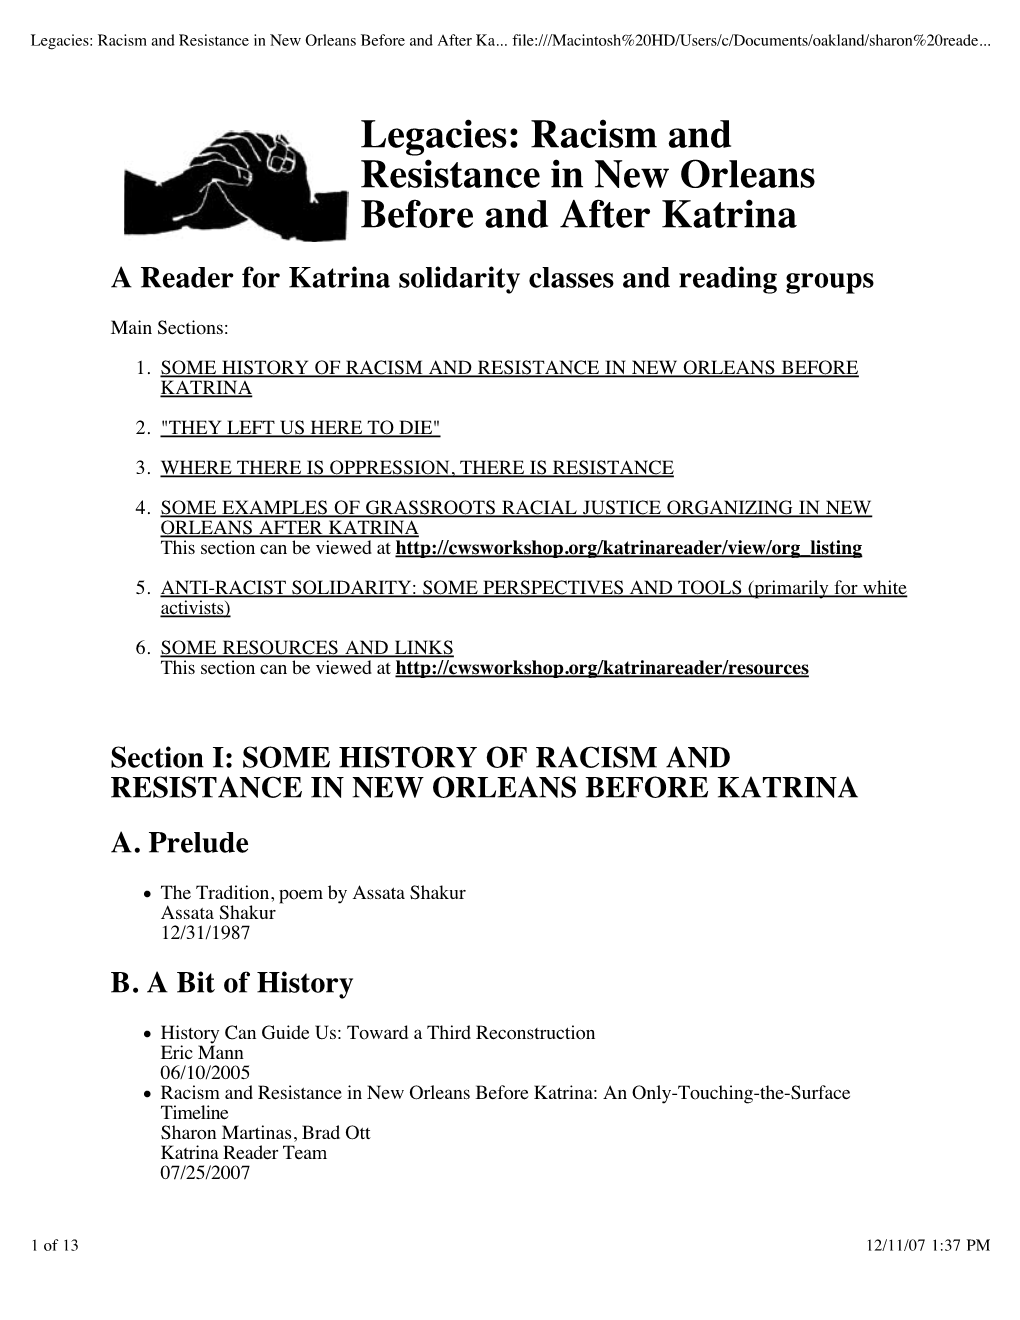 Legacies: Racism and Resistance in New Orleans Before and After Katrina a Reader for Katrina Solidarity Classes and Reading Groups